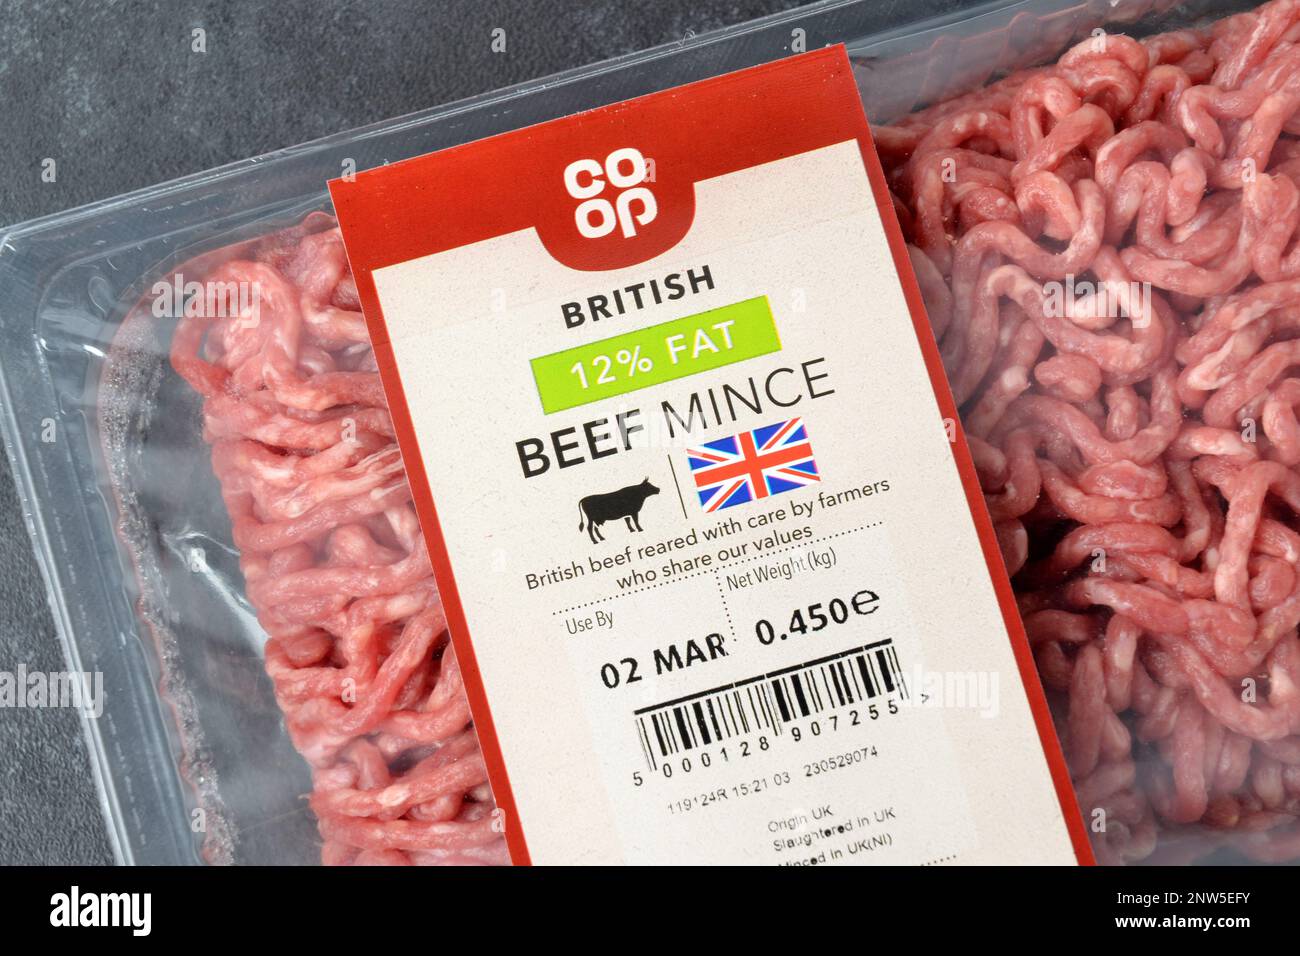 Co-Op British Beef Mince in plastic retail packaging close up of label Stock Photo